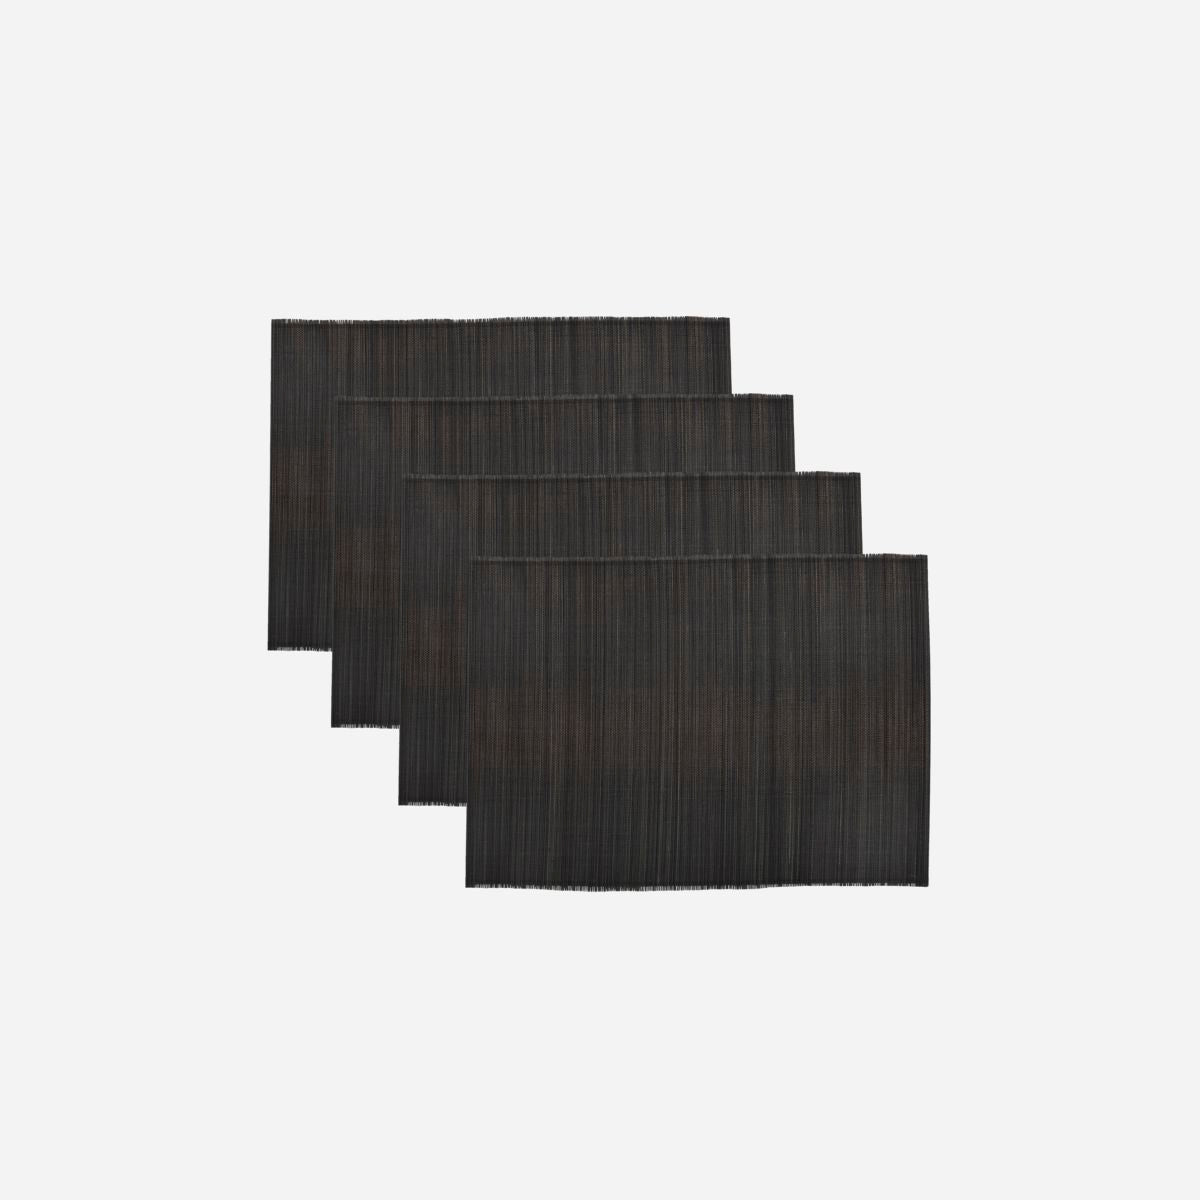 Set of 4 Black Bamboo Placemats all 4